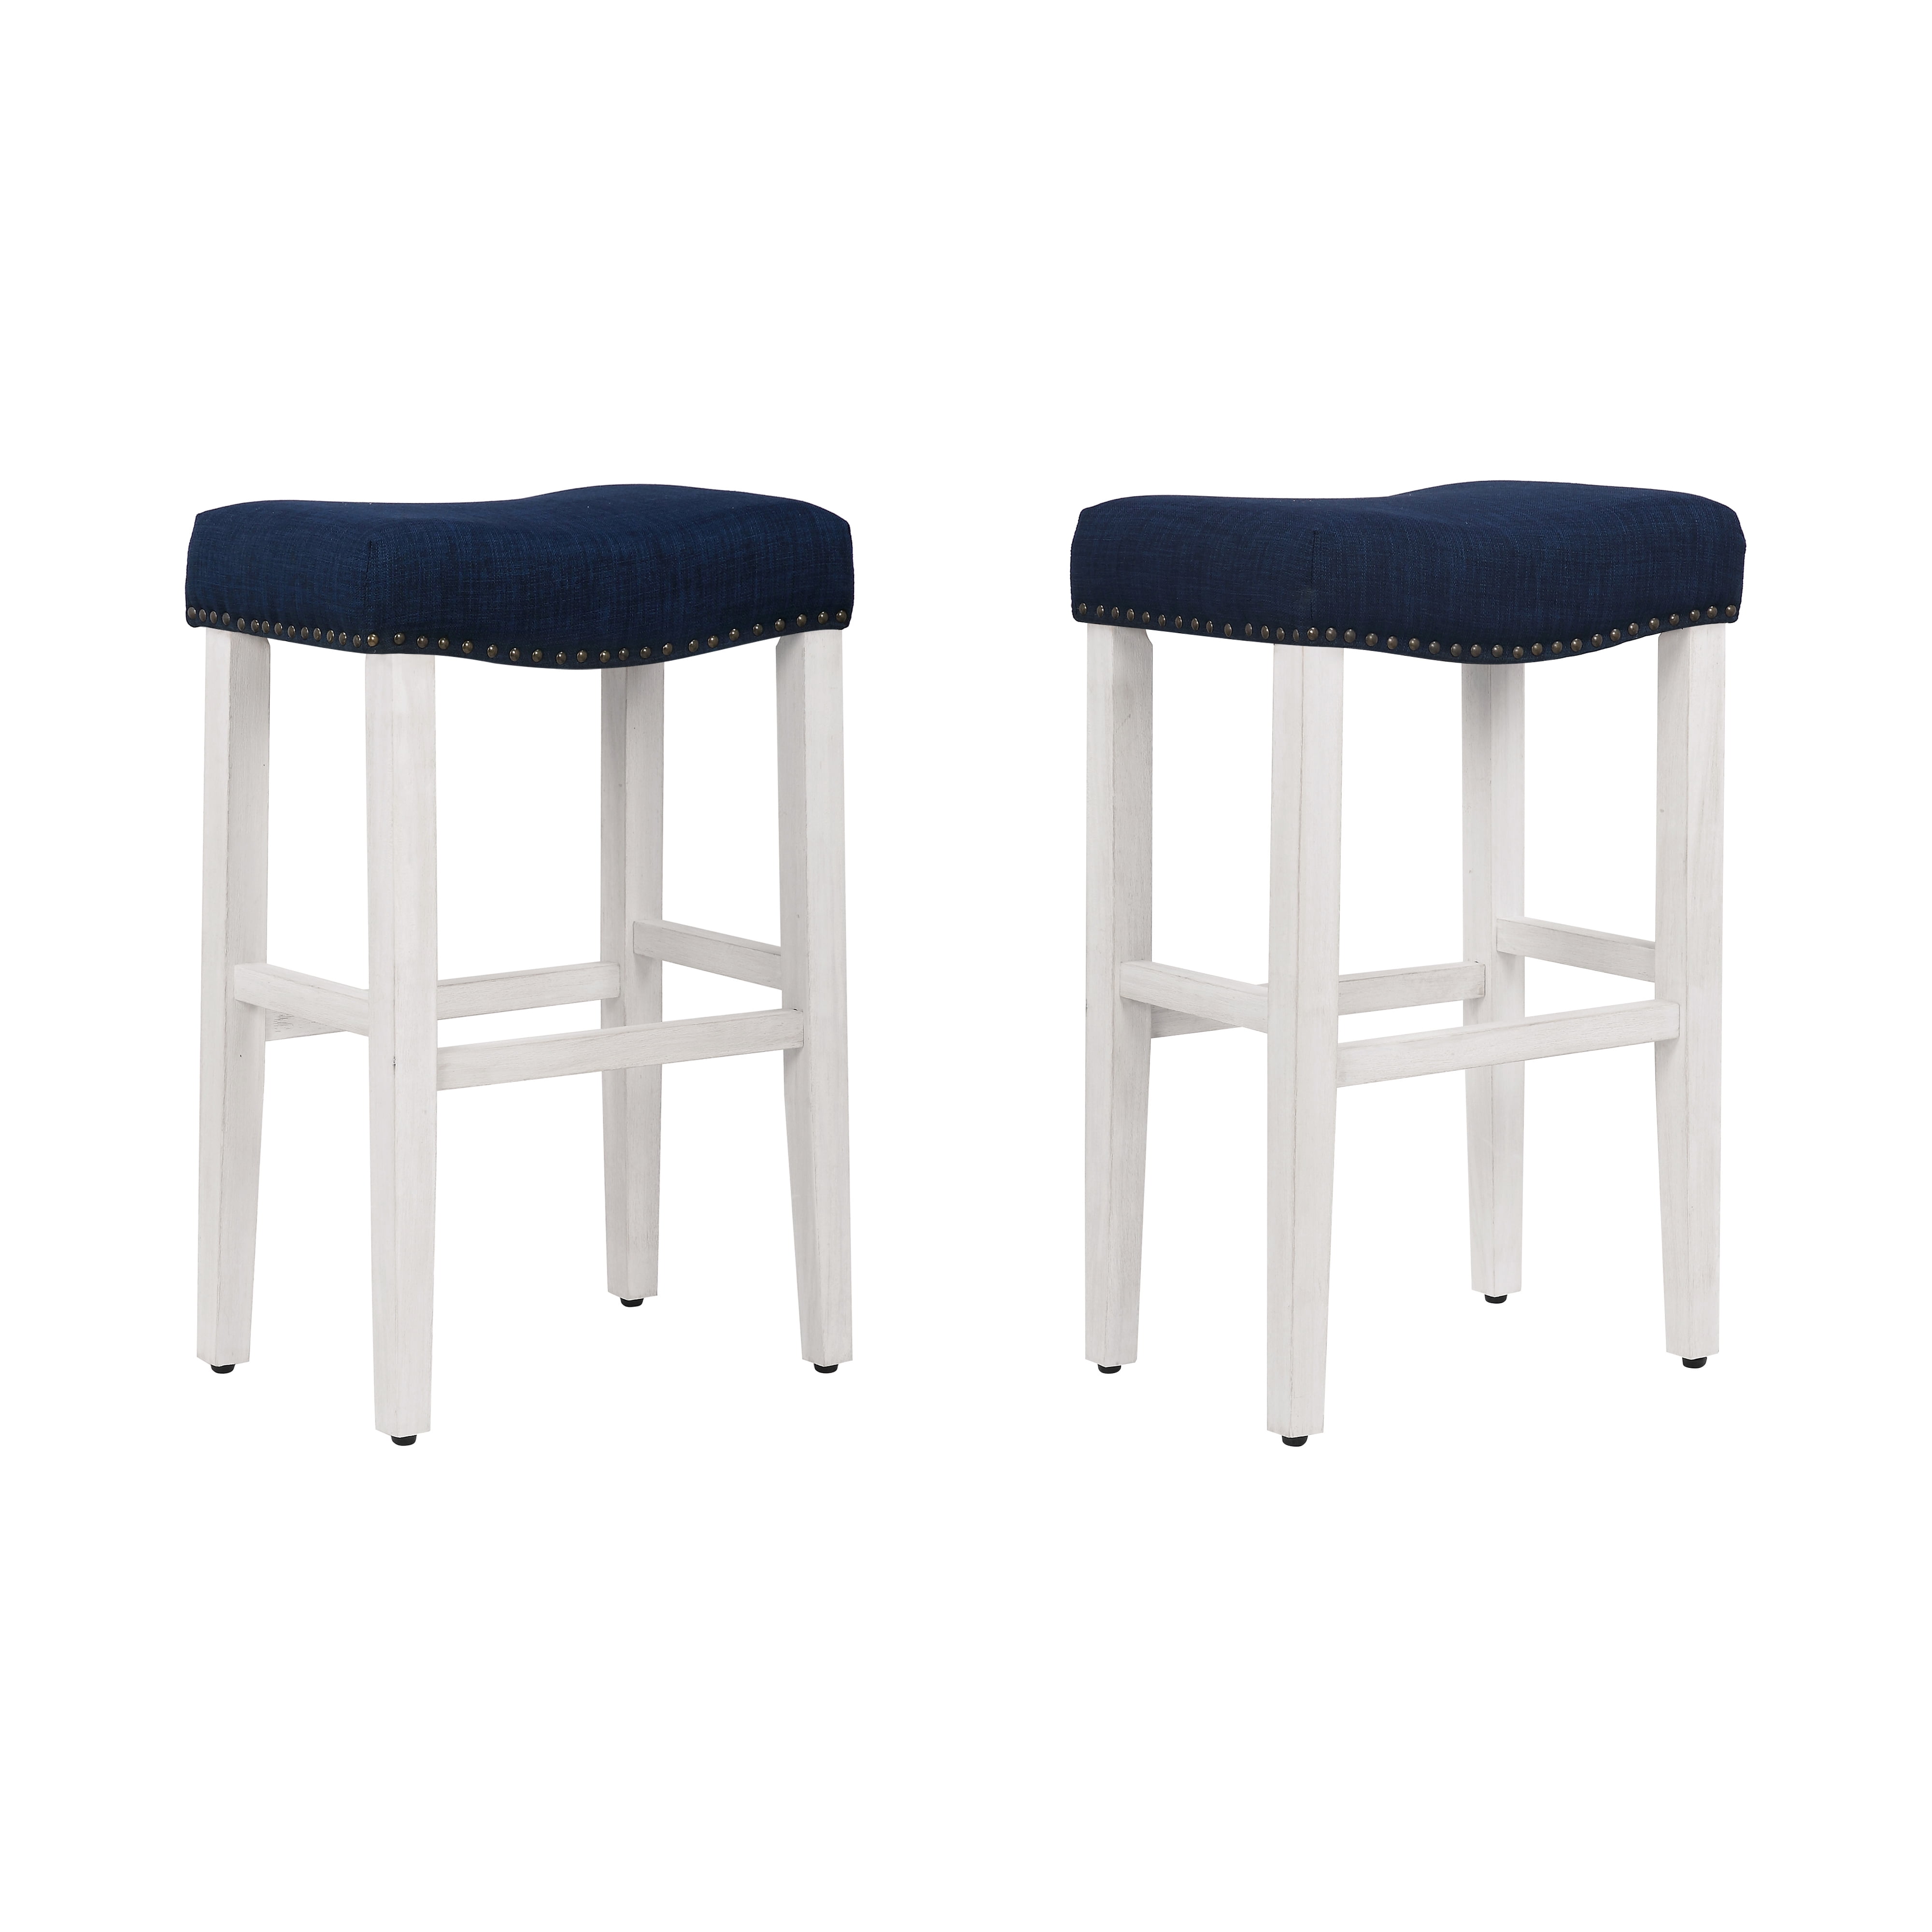 WestinTrends Barstools Bar Height Set of 2, 29